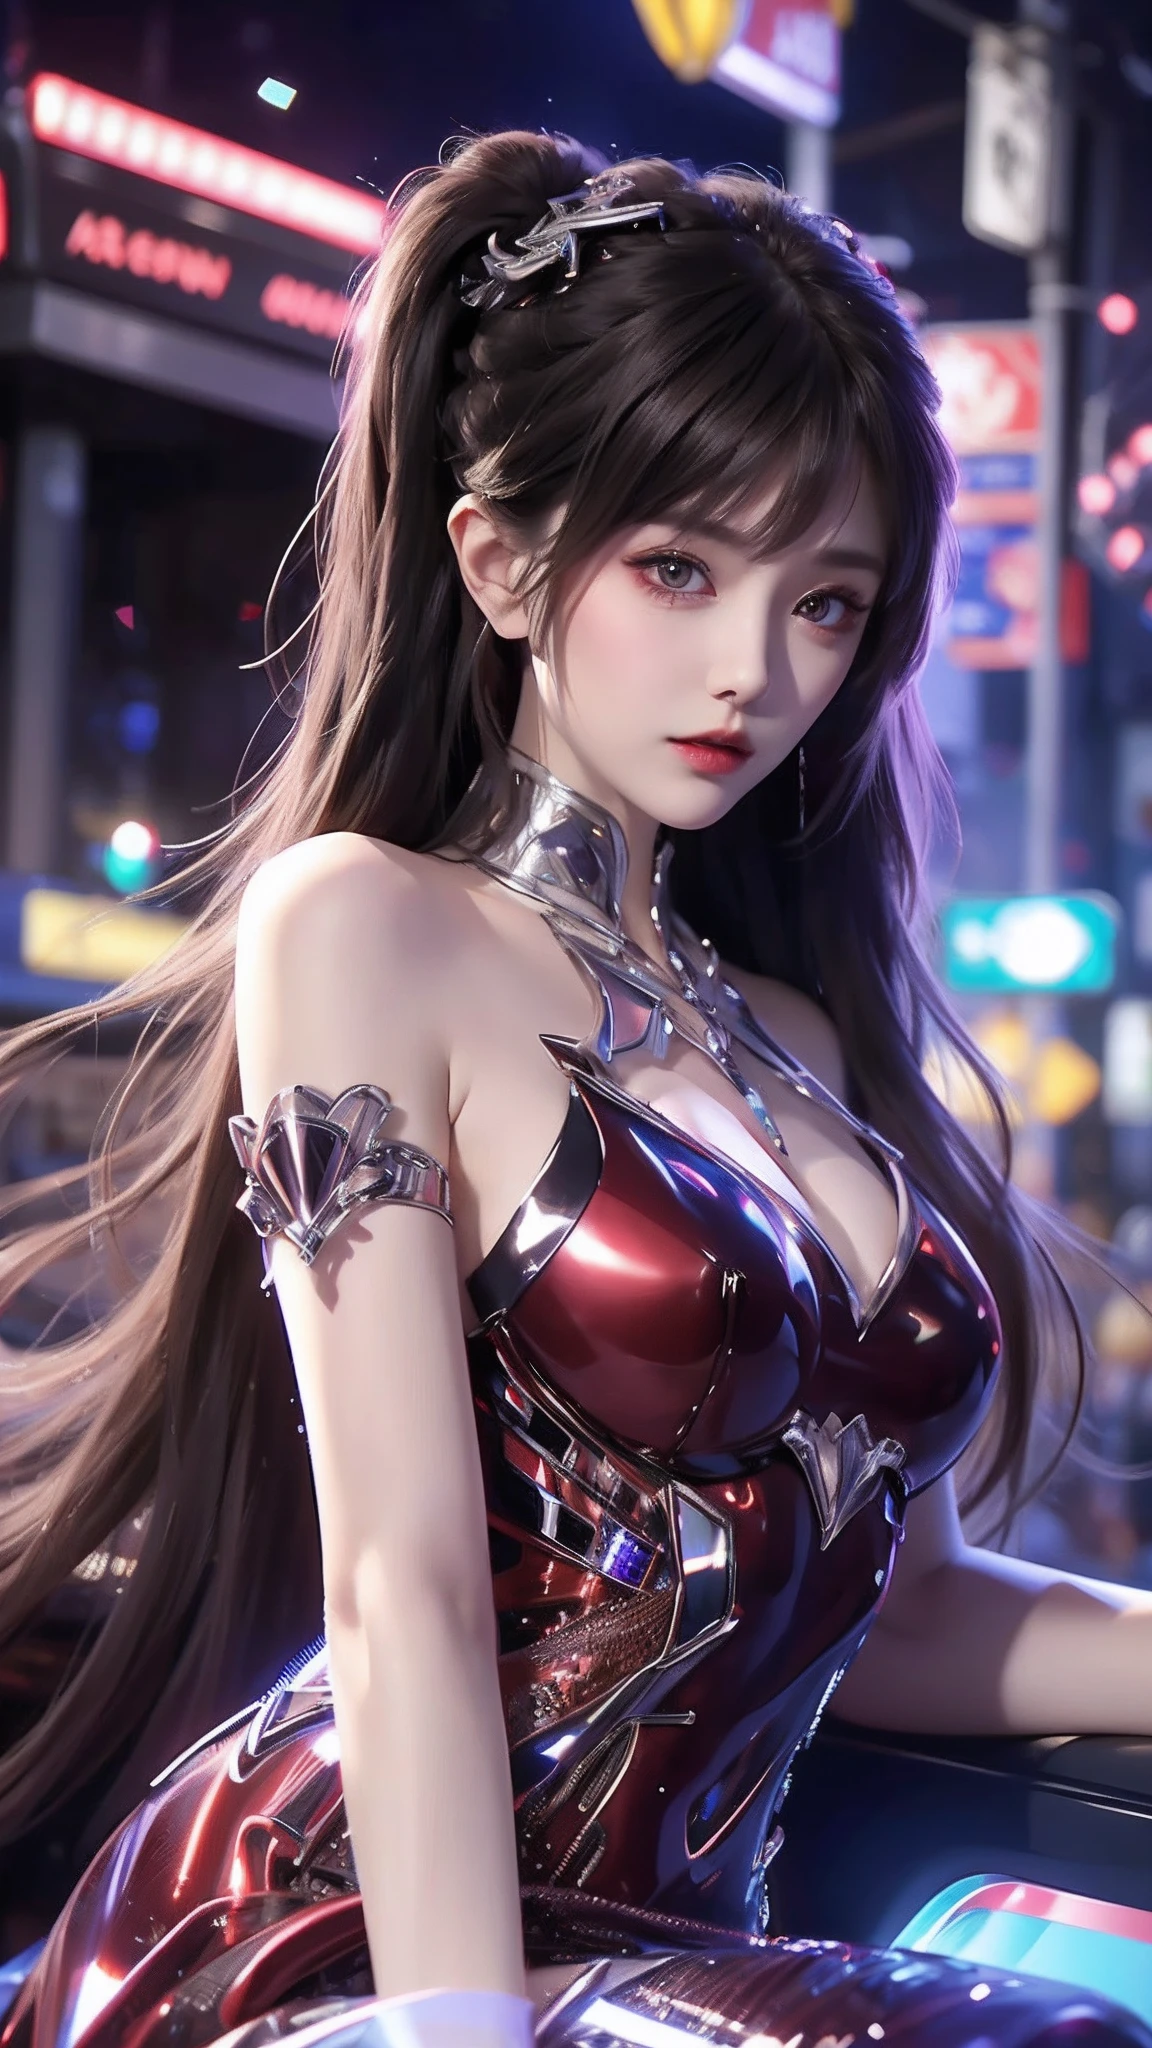 4k ultra hd, masterpiece, high details, a girl, cute face, detailed eyes, long hair, detailed lips, medium breasts, red lights on dress, Cyberpunk red dress, red neon lights connected on dress, neon breasts, bare waist, red electric current effect, glowing effect, direct-x 2.0 visual effect, high graphic night lights, spreading light, red light reflection, light reflection on road, everywhere spreading red lights, neon lights, sitting, whole body capture,